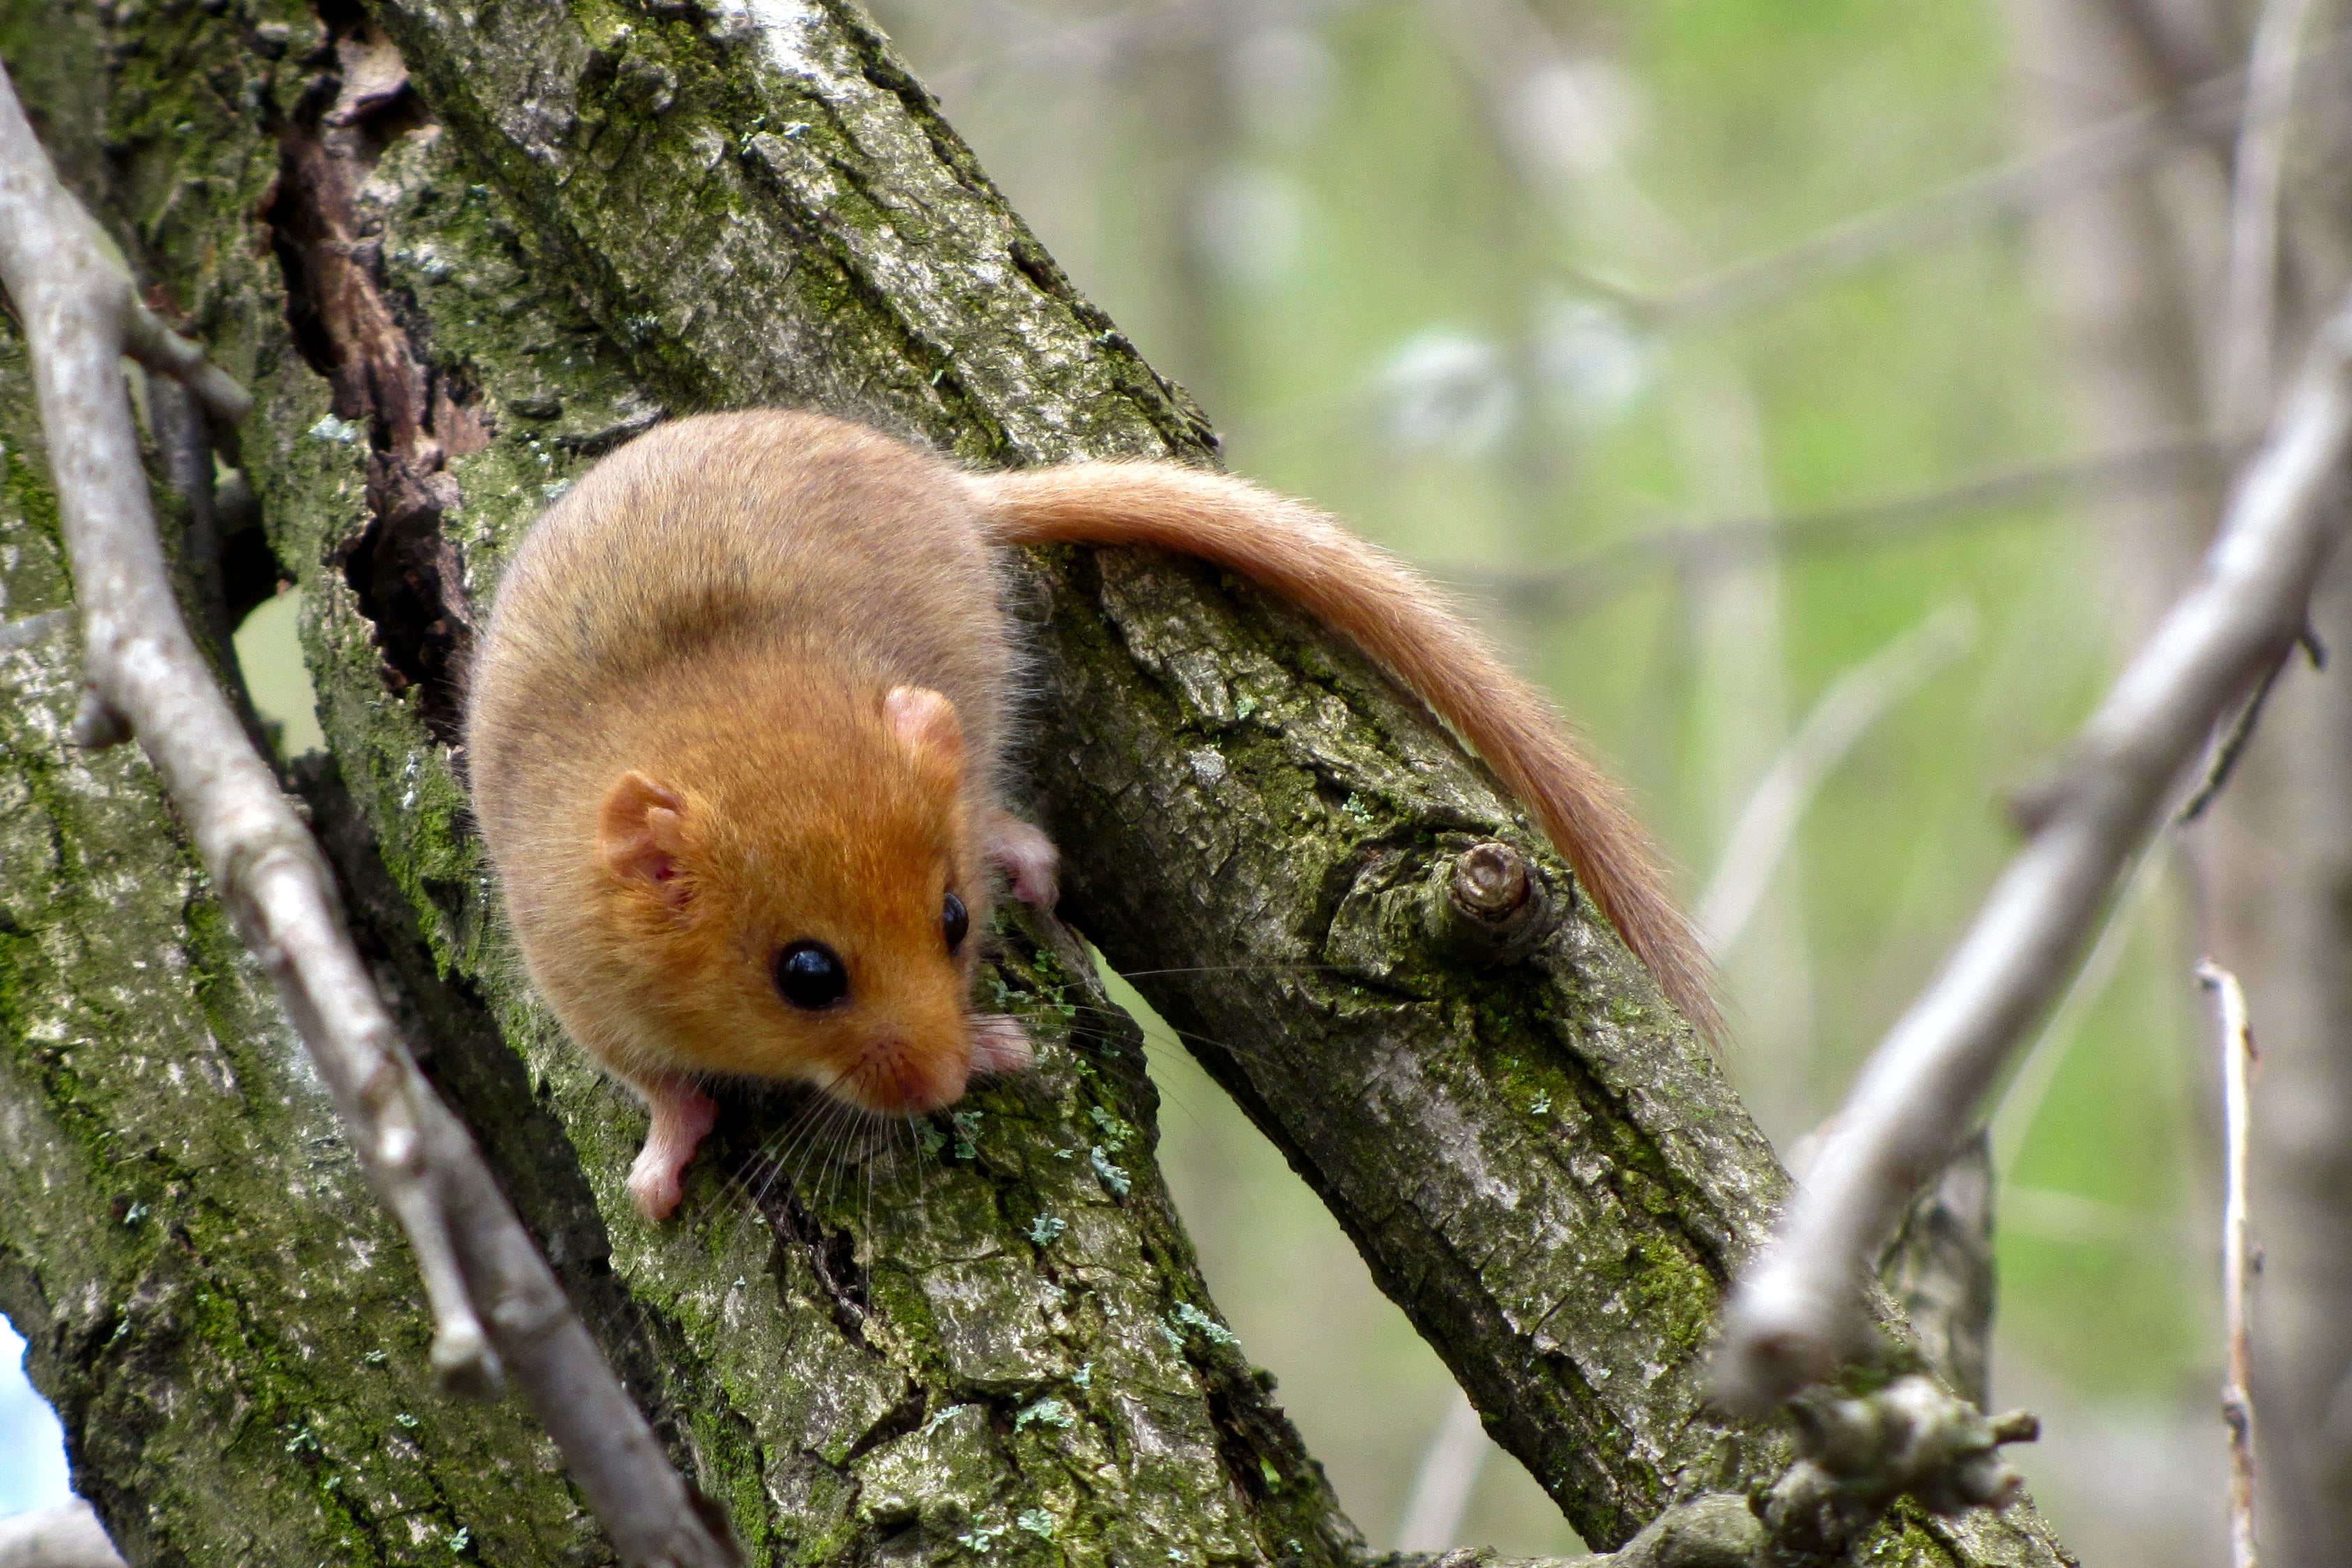 The hazel dormouse is one of many British mammals facing extinction